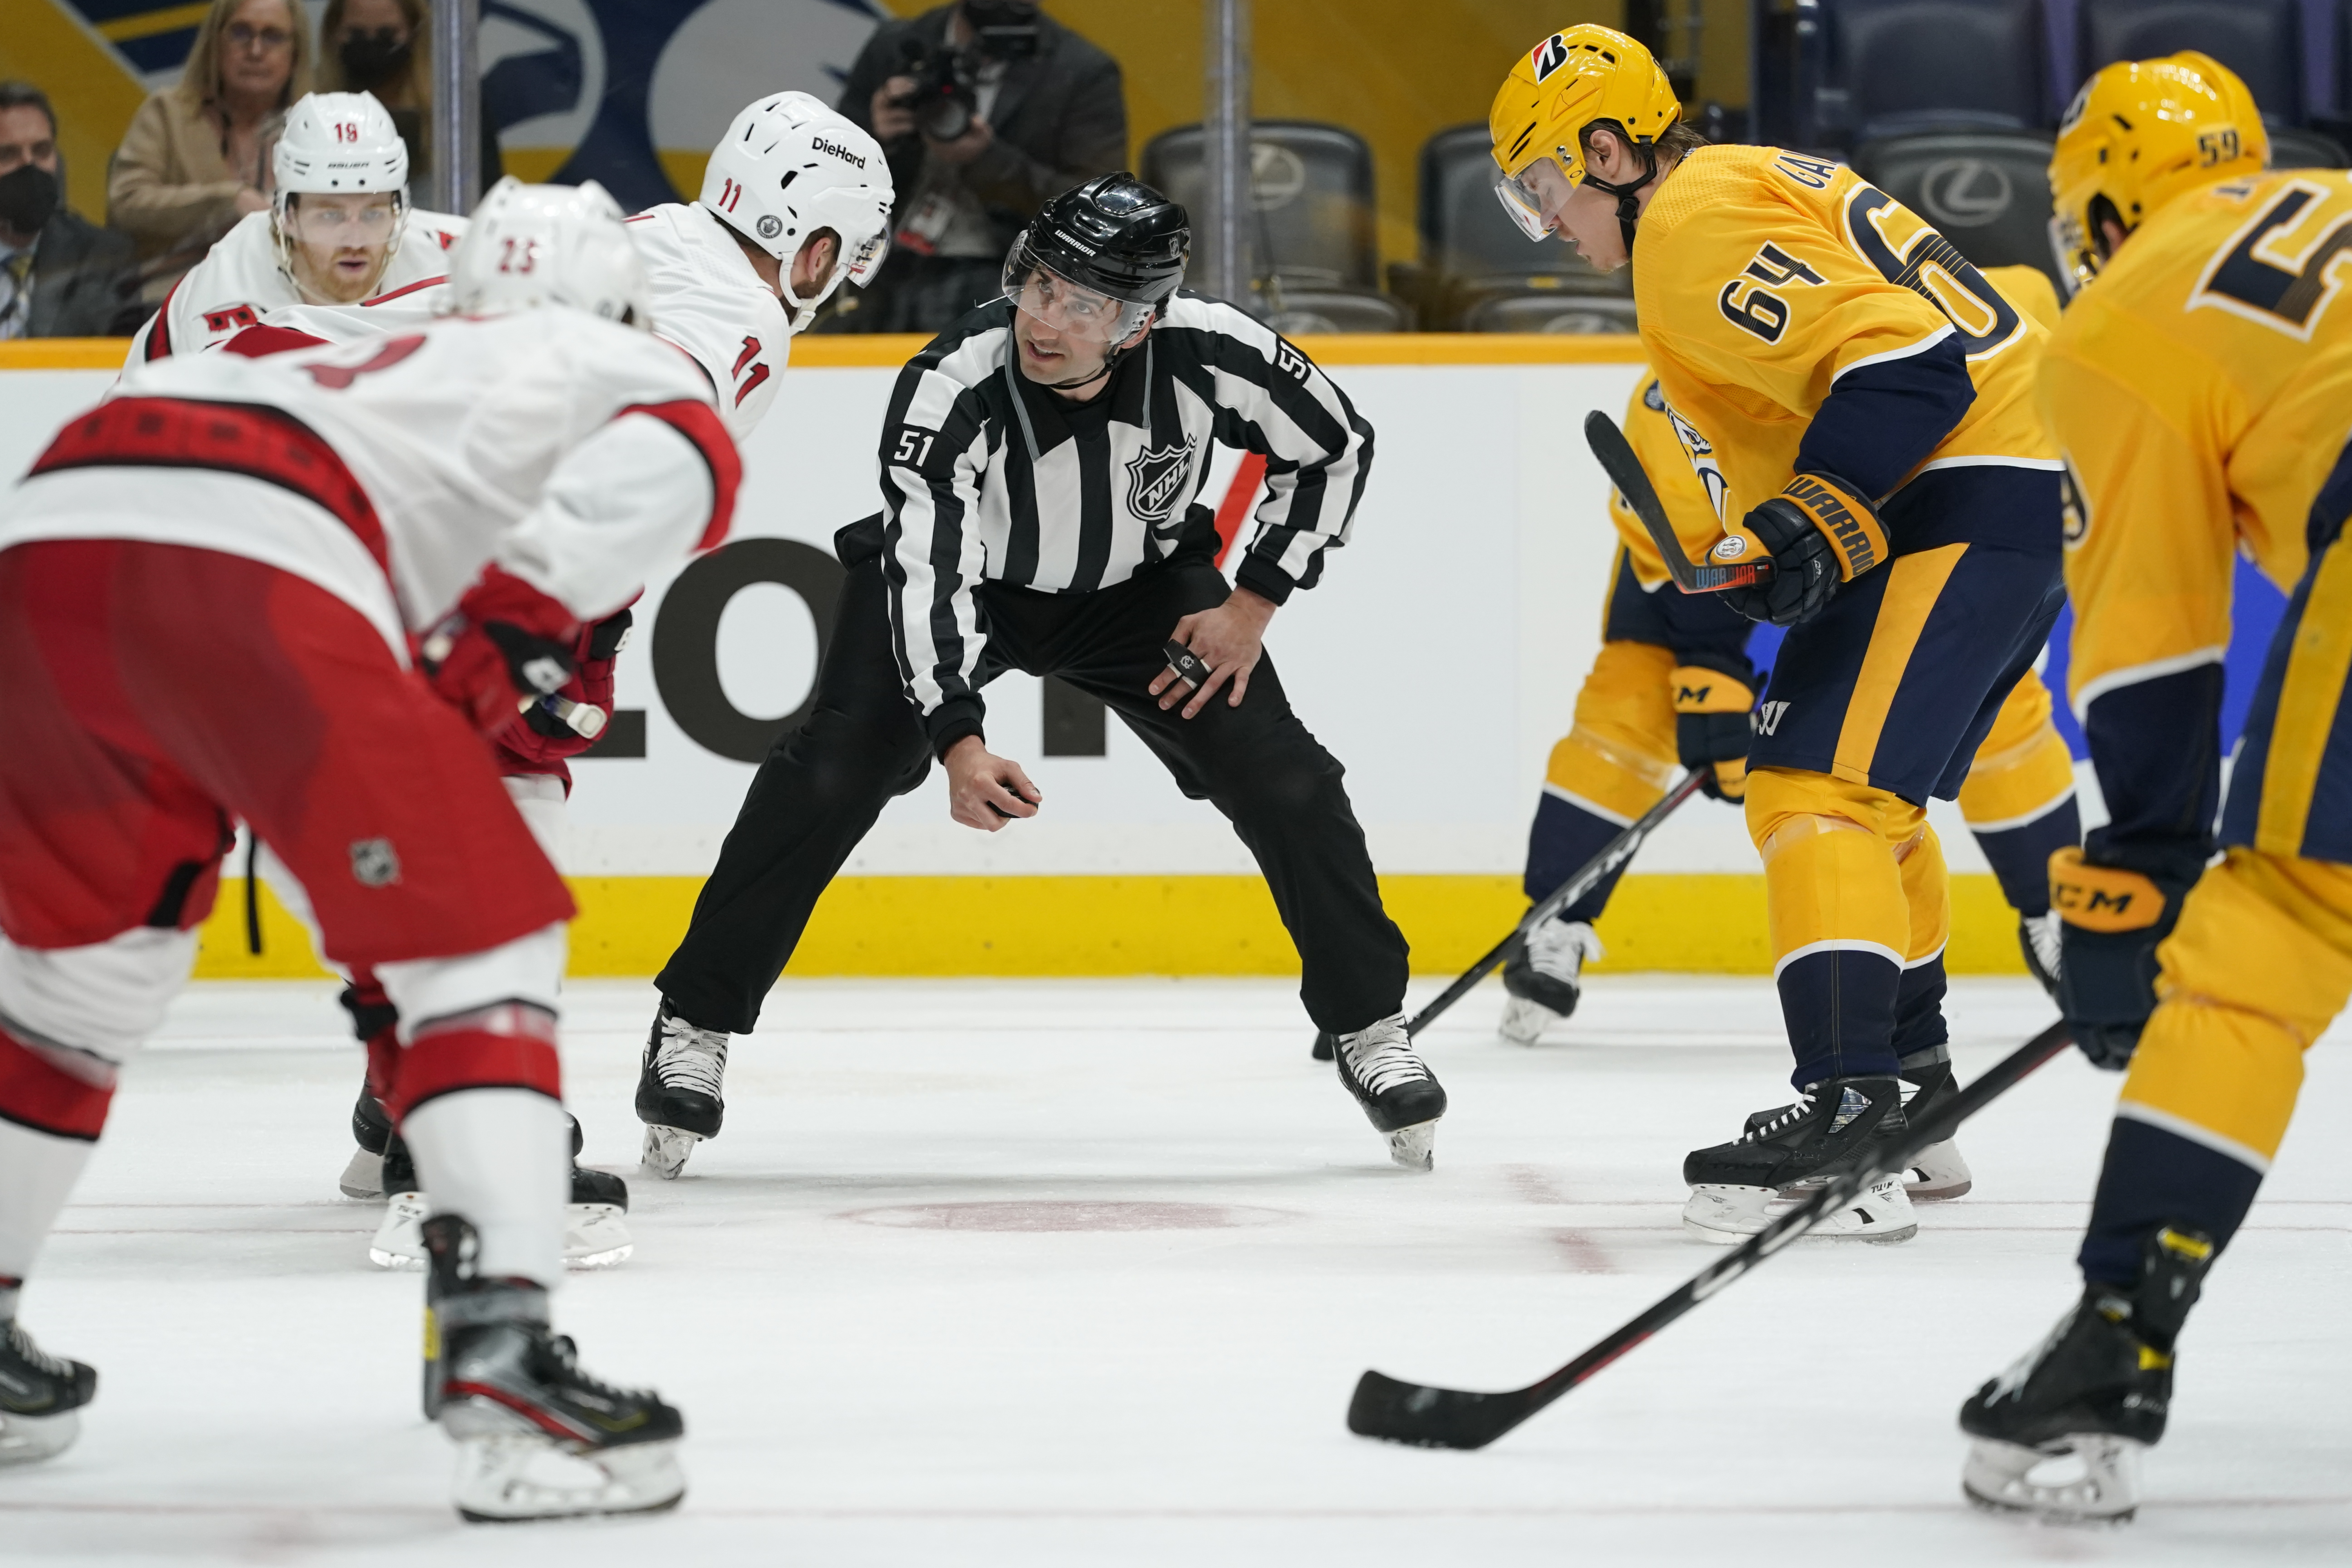 Nashville Predators at Carolina Hurricanes Game 5 free live stream (5/25/21) How to watch NHL, time, channel